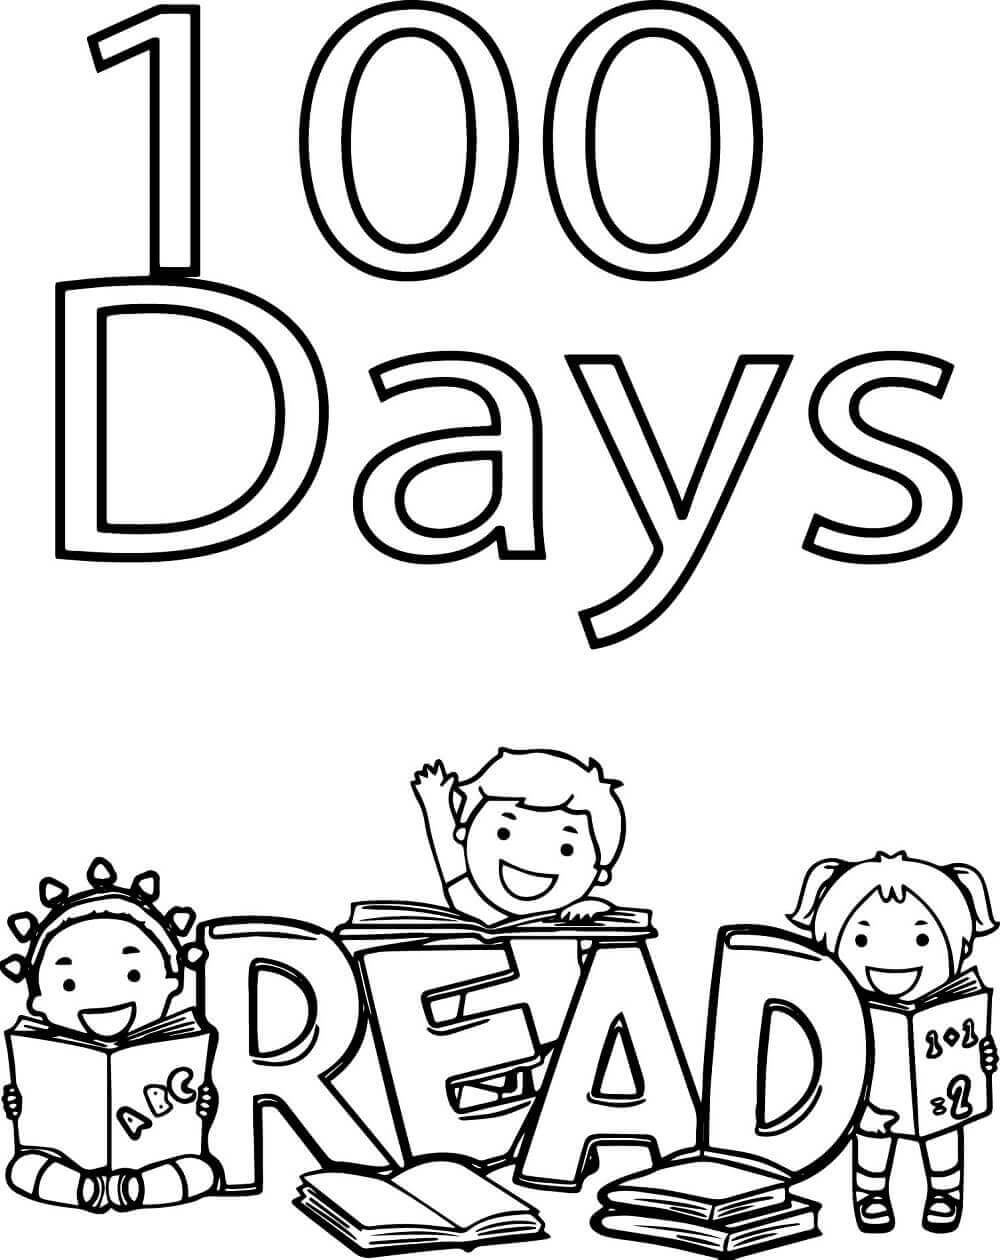 coloring-sheets-of-days-of-school-free-printable-100-days-of-school